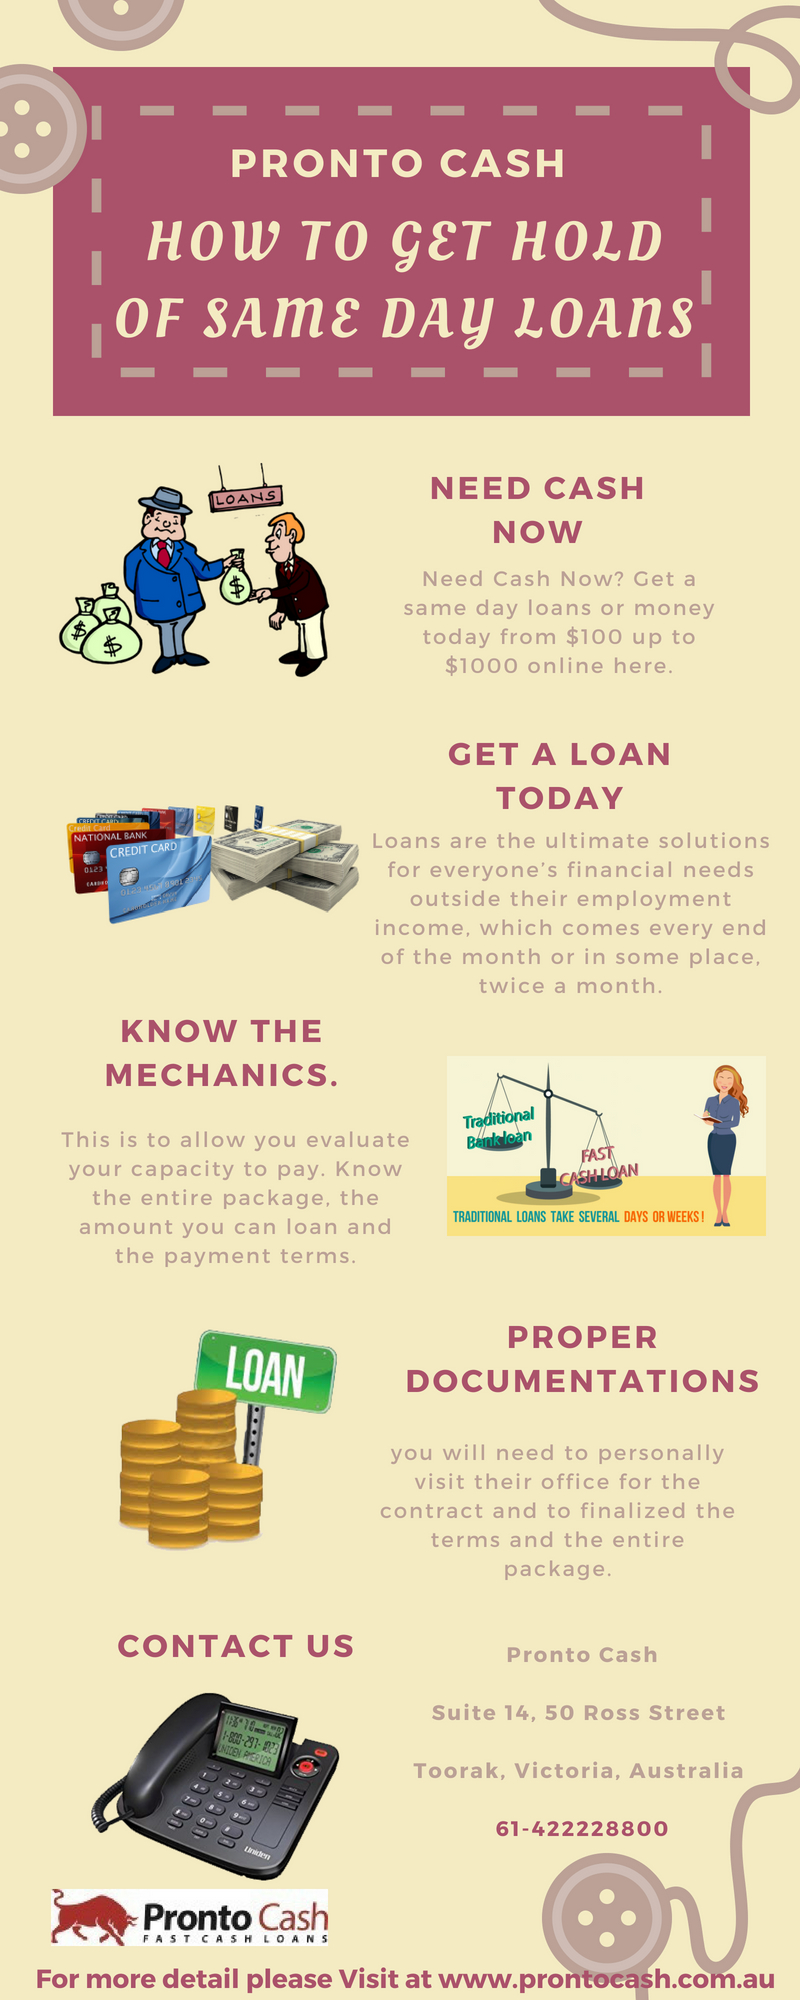 How to get hold of Same Day Loans Need Cash Now? Get a same day loans or money today from $100 up to $1000 online here. Pronto Cash is the best place to go for easy & fast cash. Apply Now! https://www.prontocash.com.au

 by ProntoCash